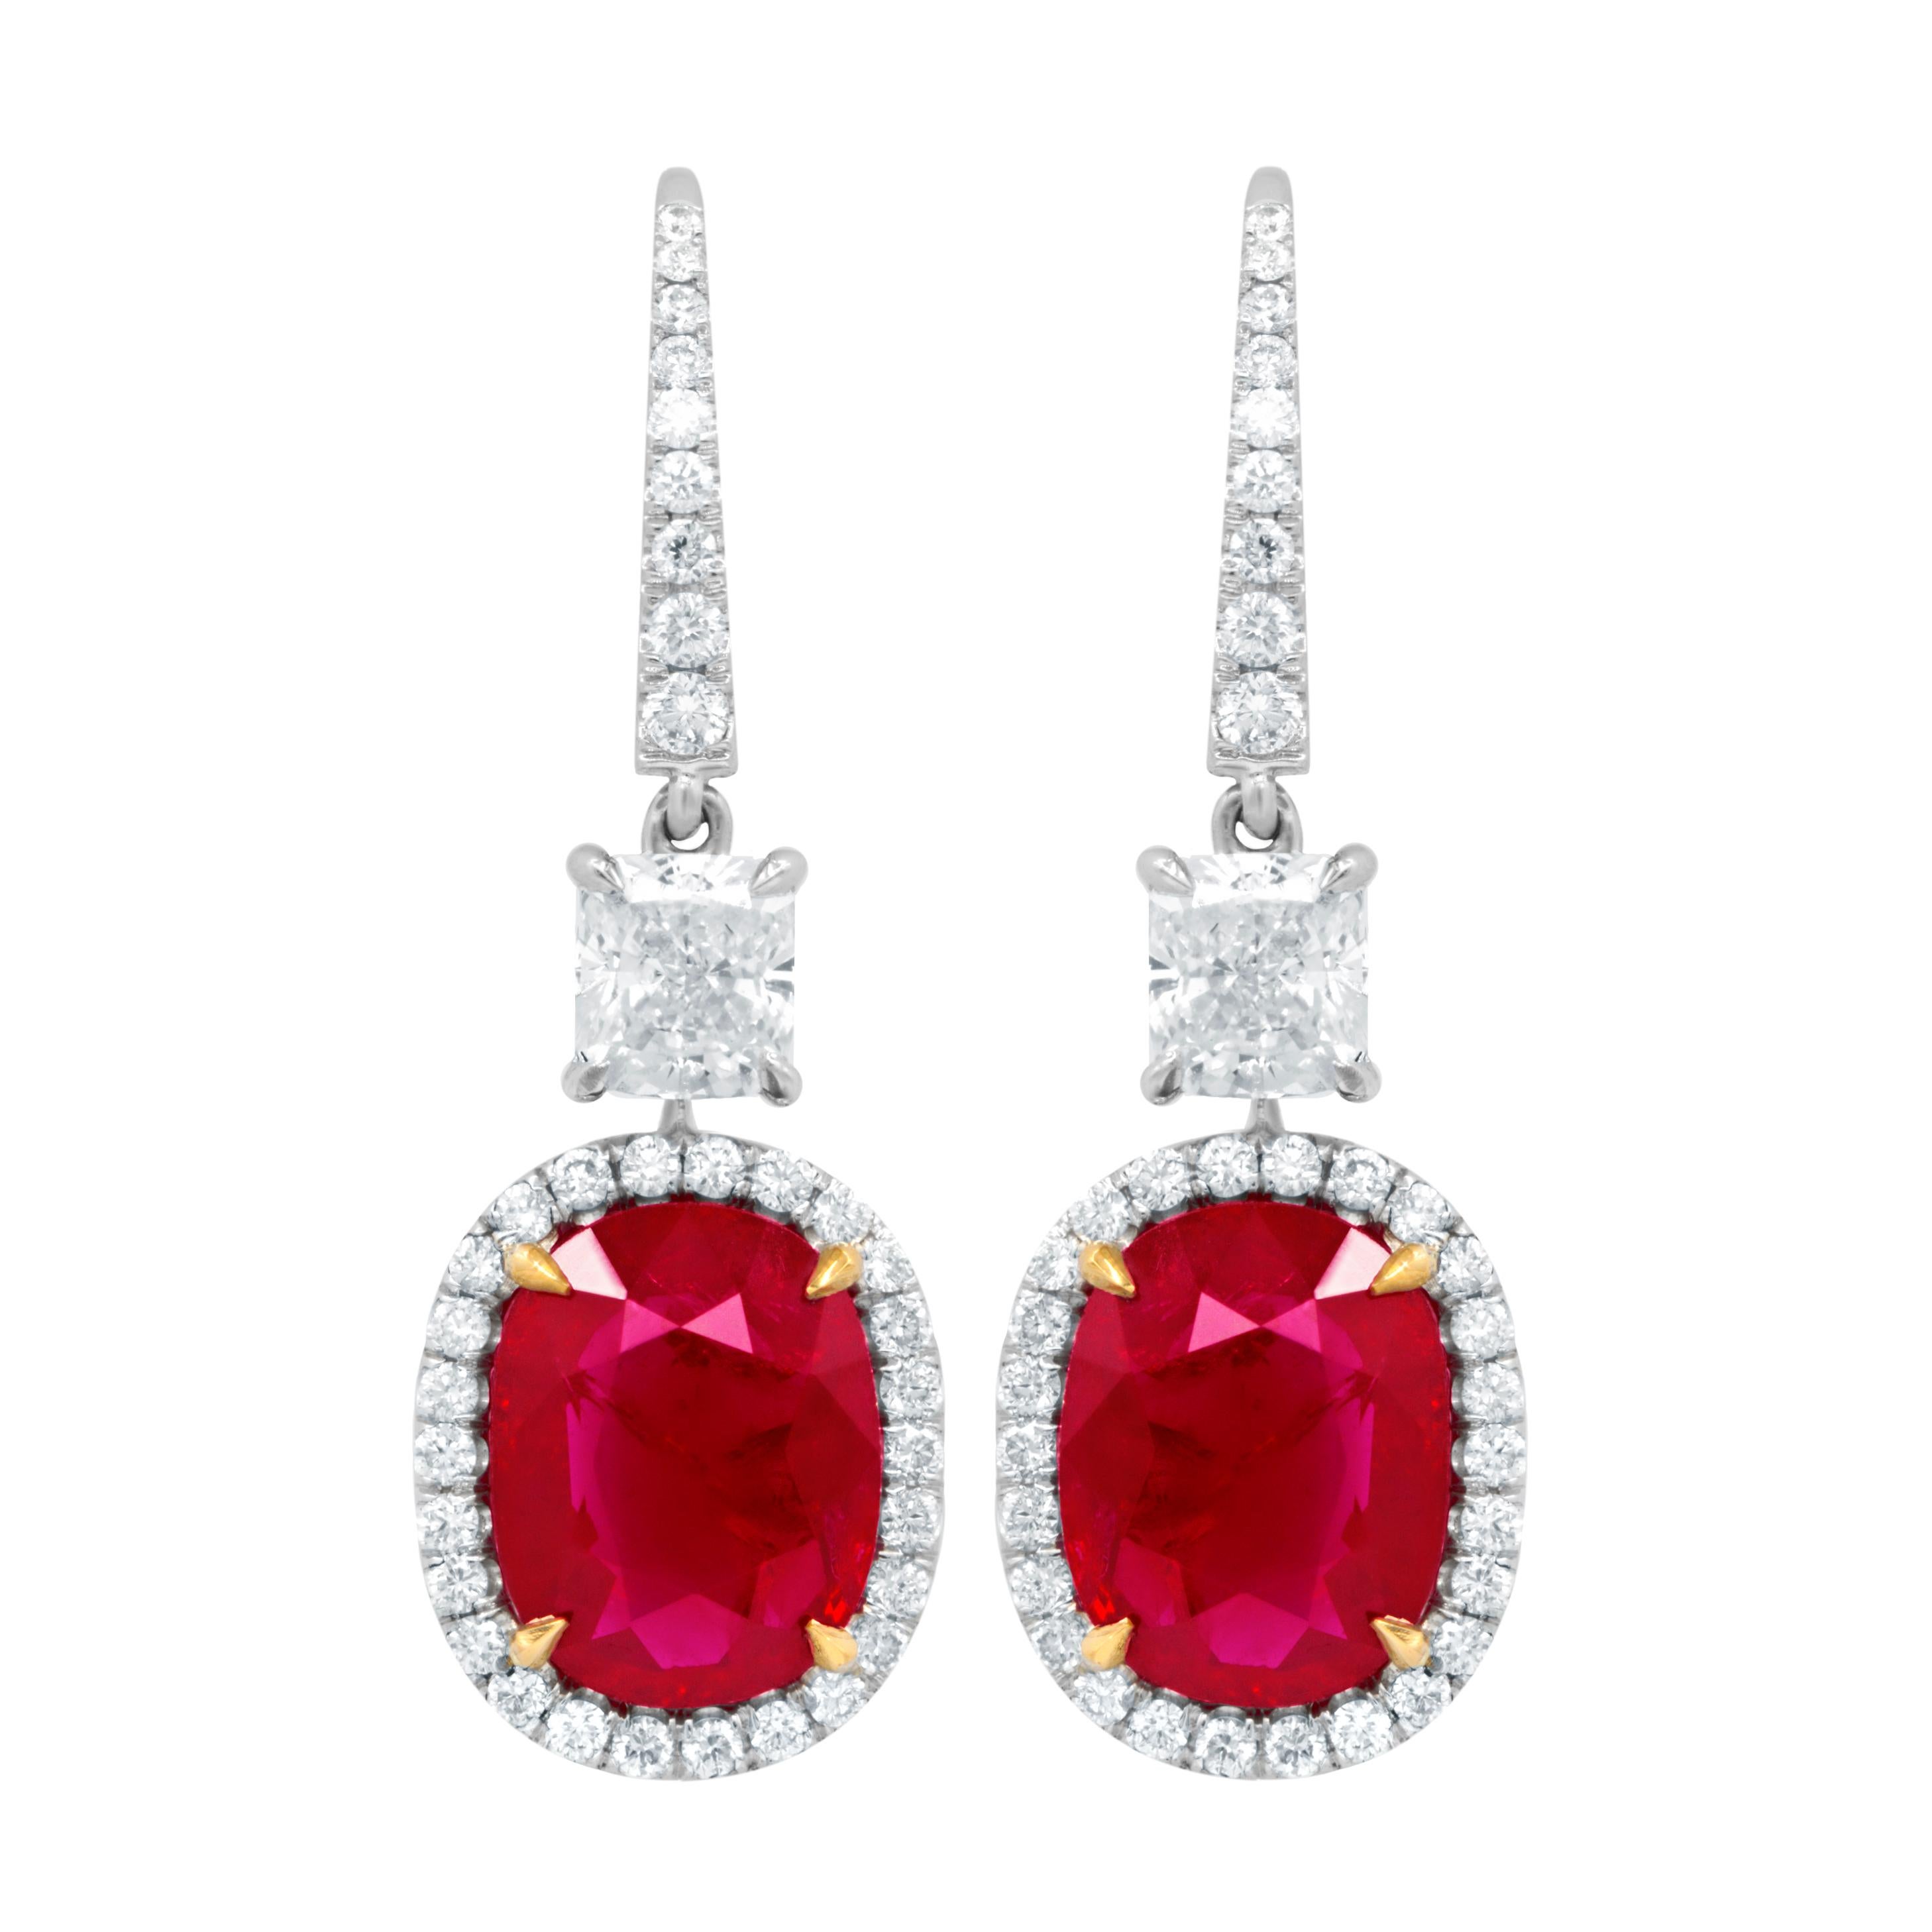 Oval Cut Diana M. 18kt White Gold Oval Shape Ruby GIA Certified Earrings For Sale